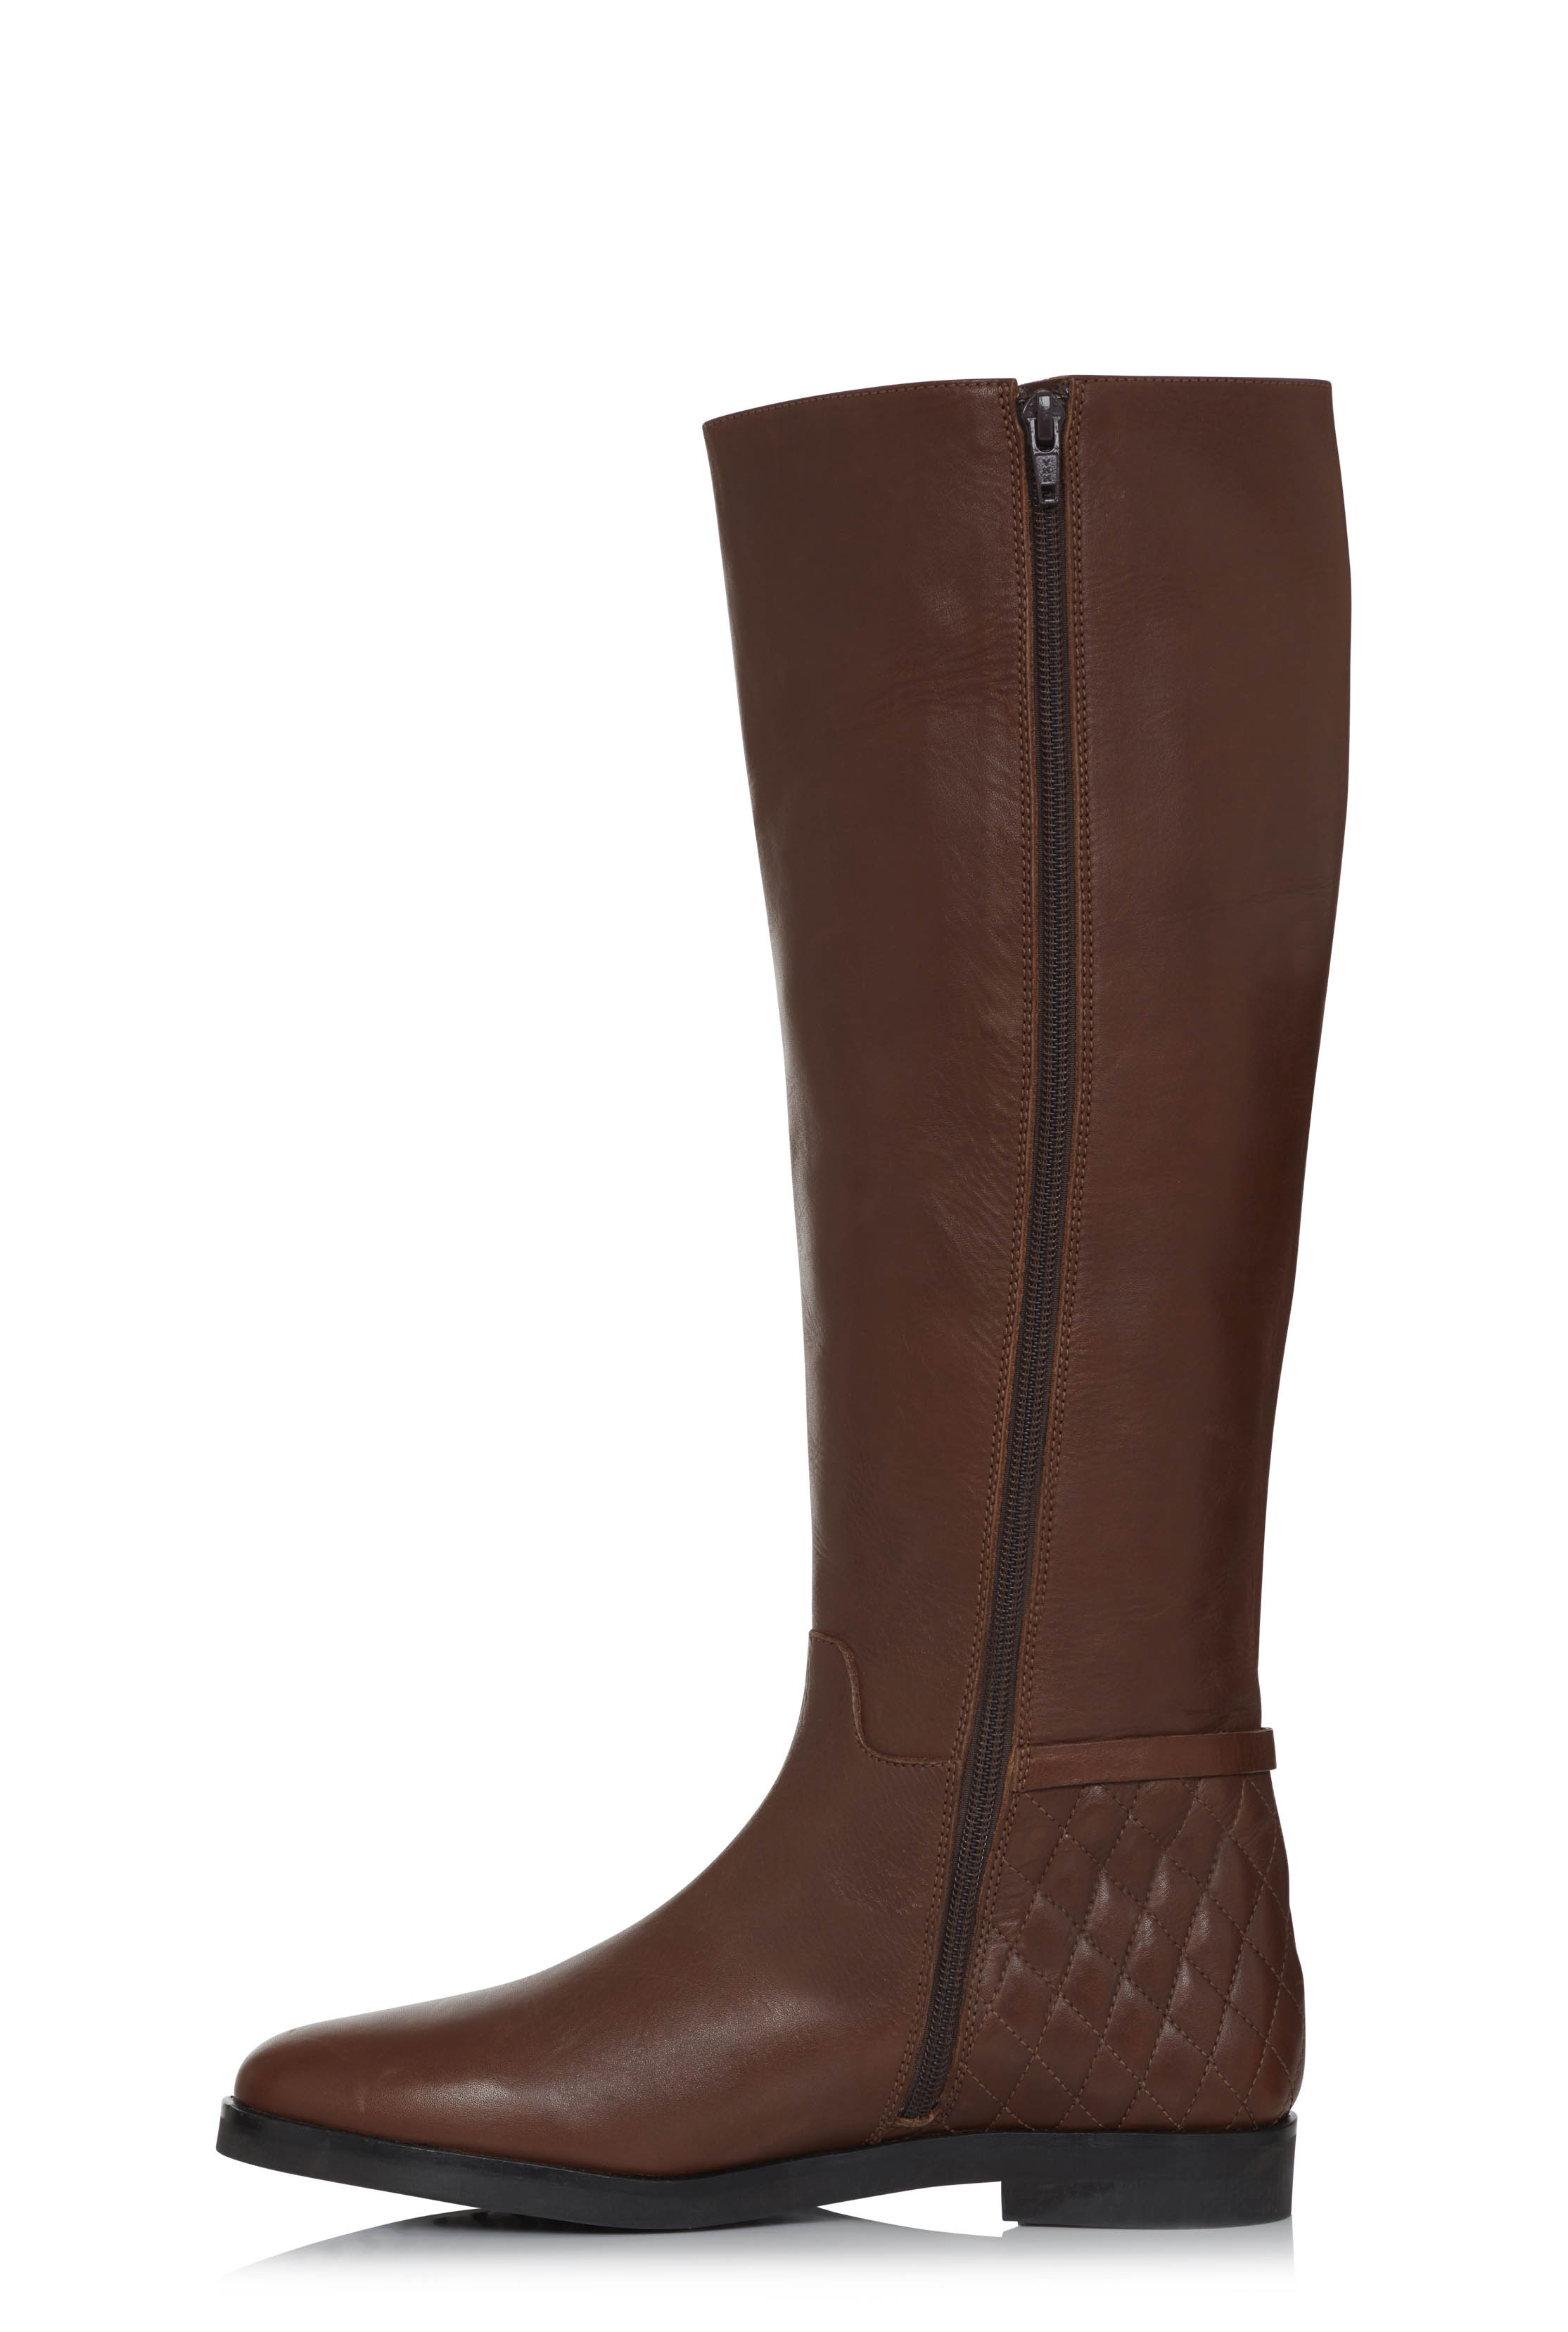 LTS Pippa Leather Riding Boot | Long Tall Sally